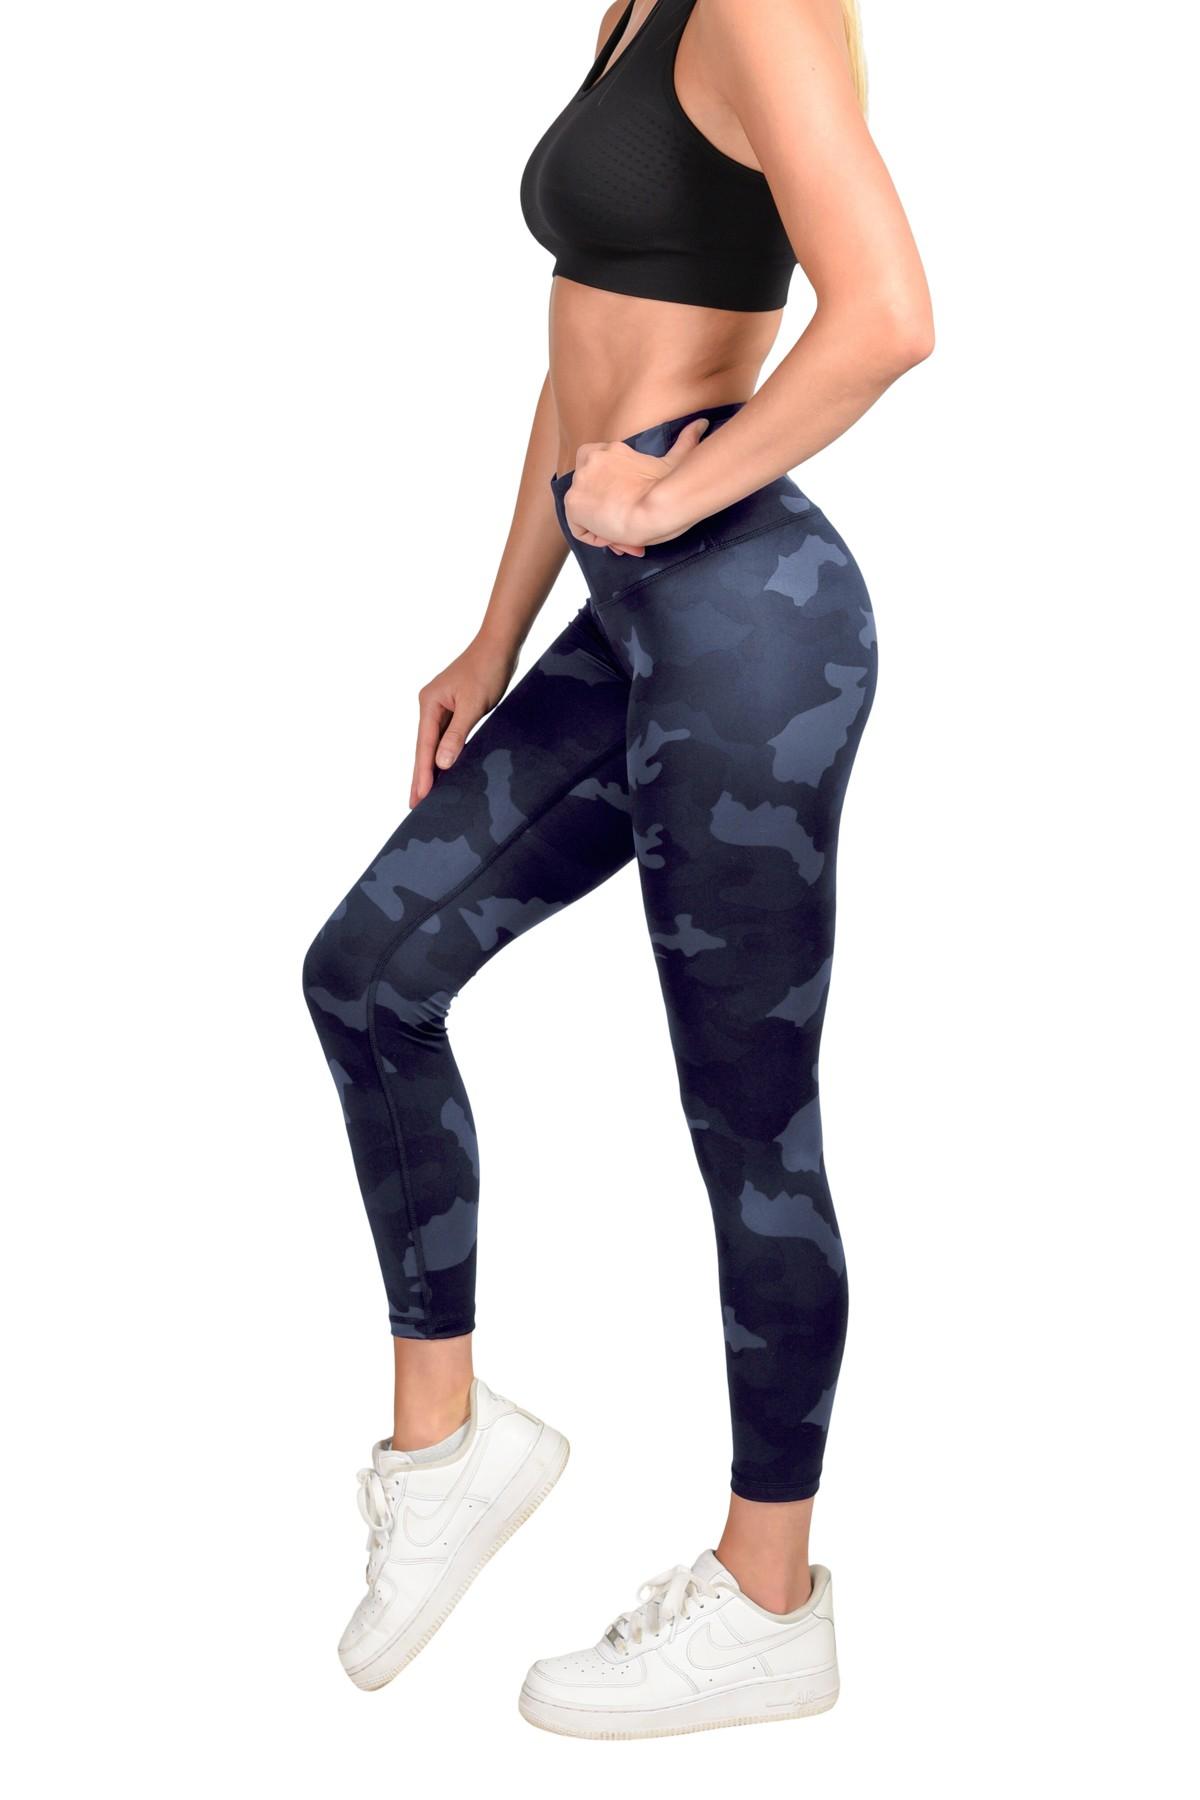 90 Degrees Synthetic Lux Camo High Waisted Ankle Leggings in Camo Navy ...